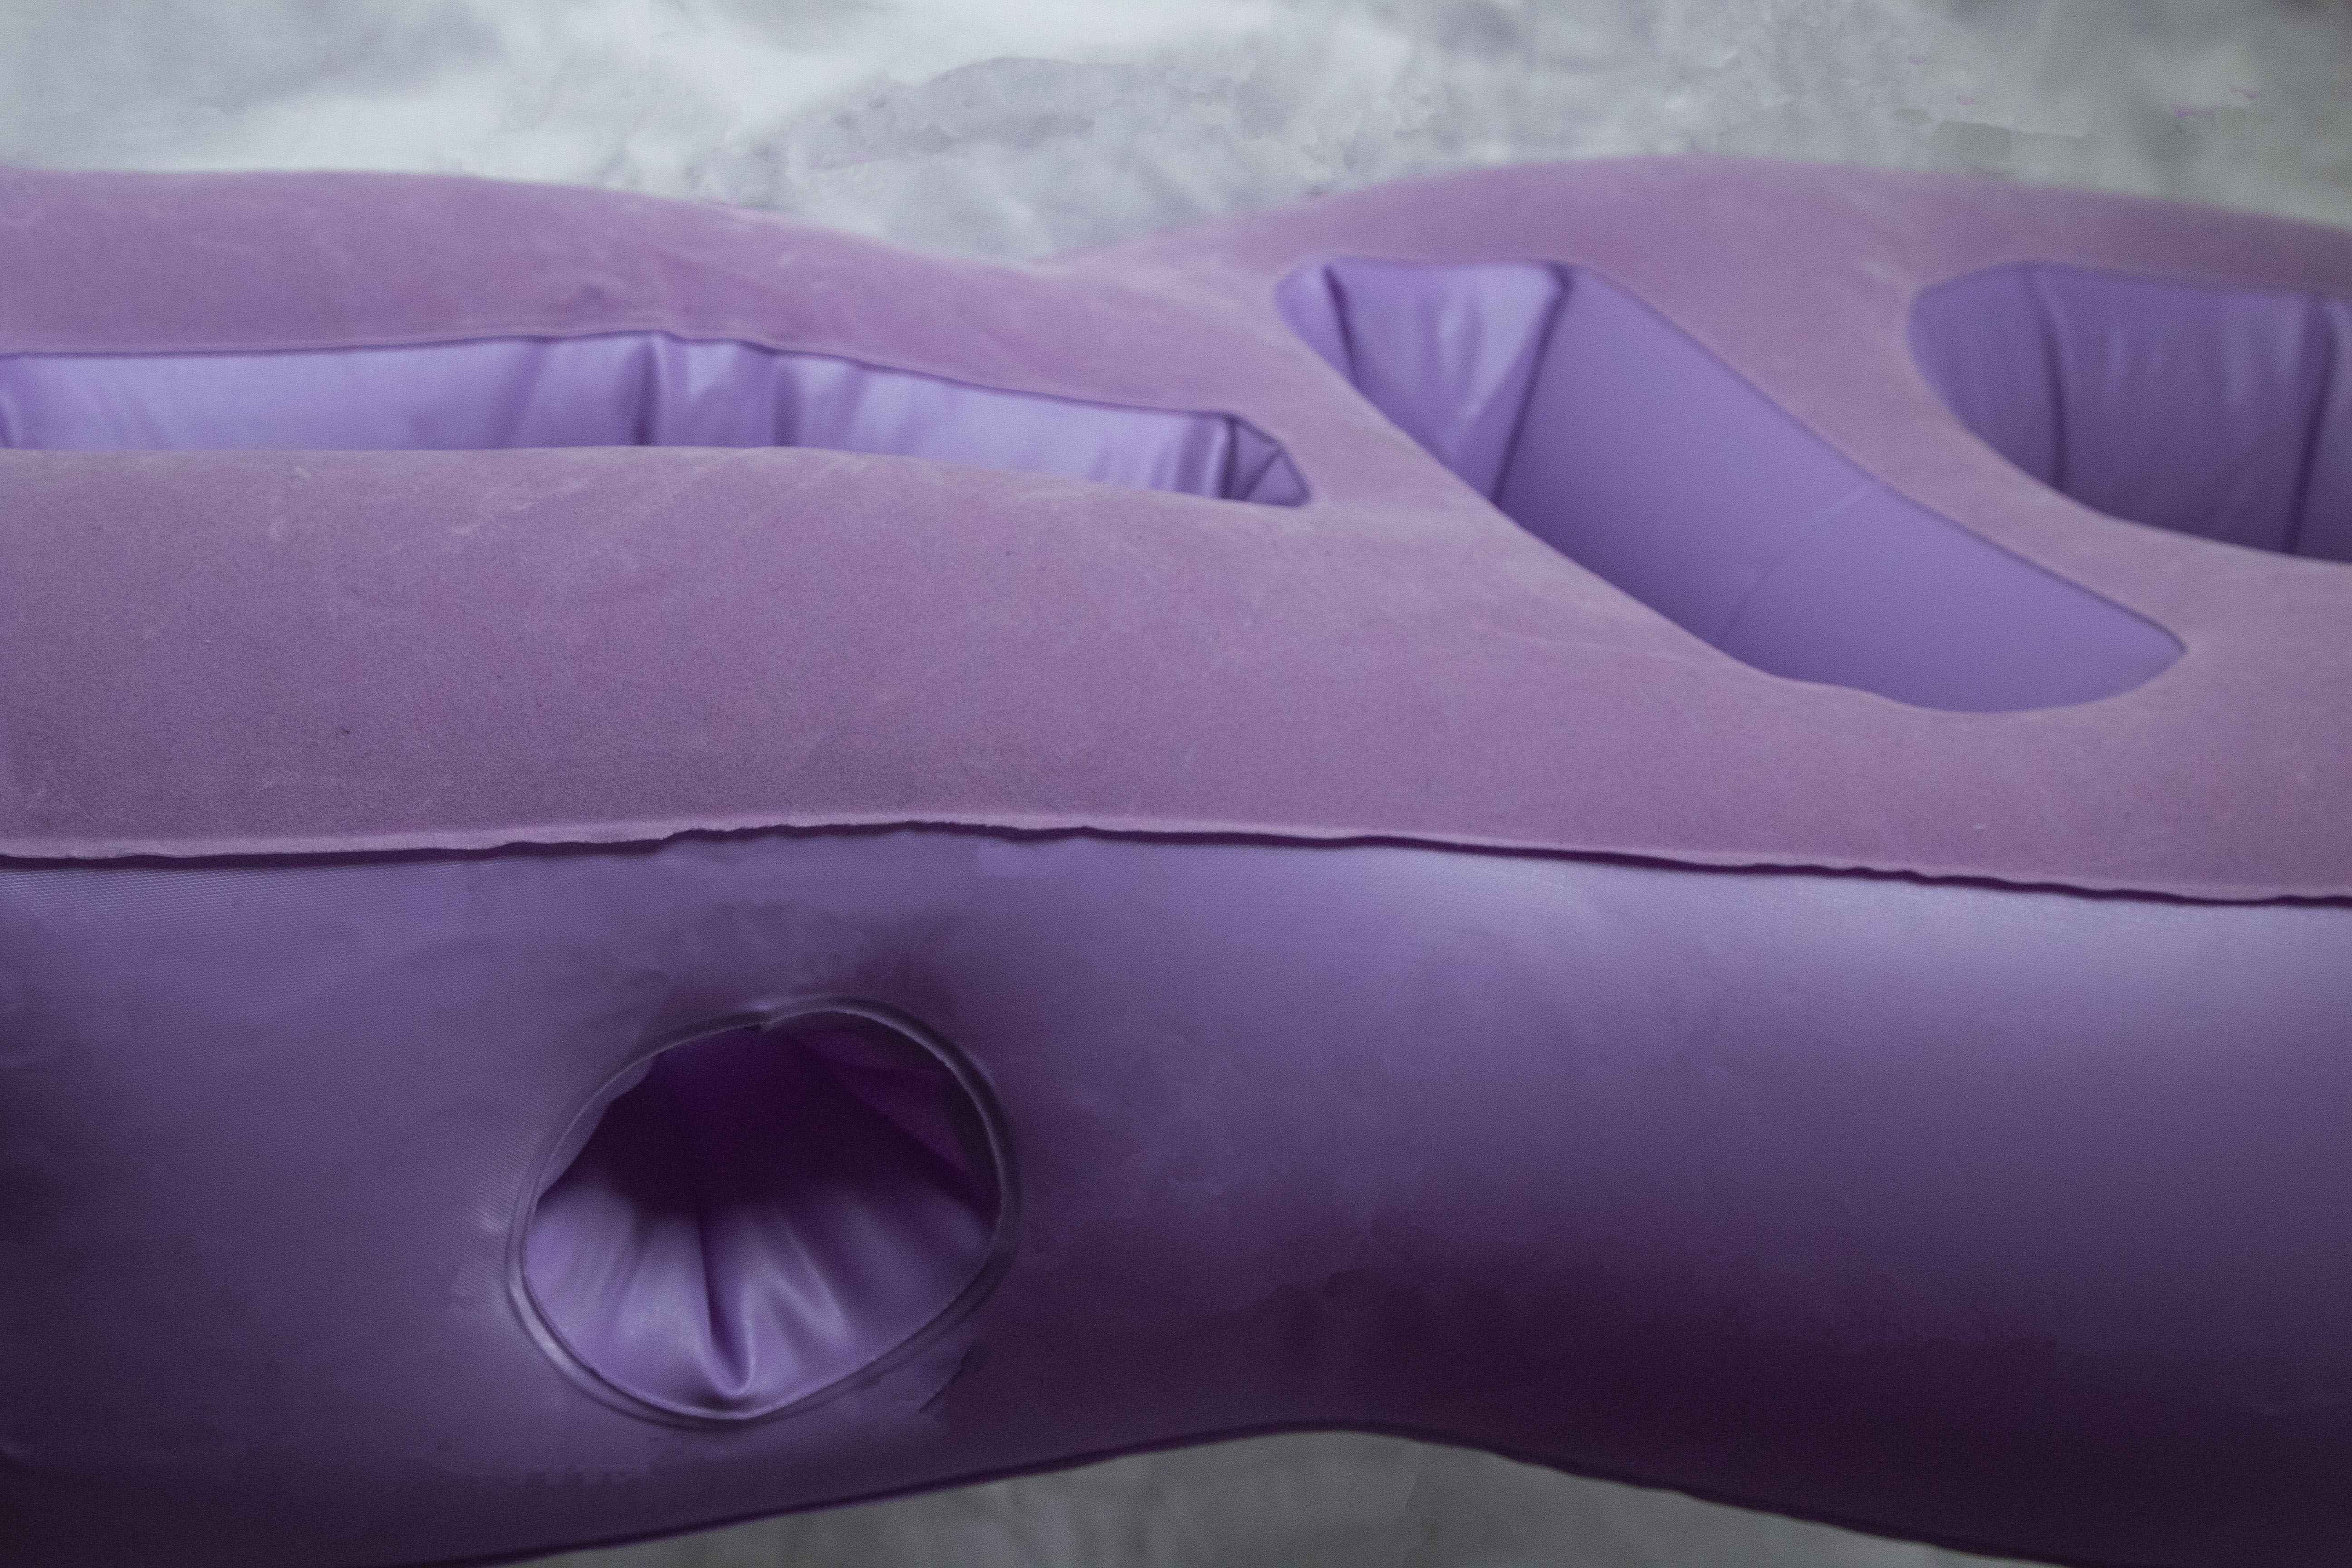 A purple, inflatable pregnancy pillow called Tummy Cradle, with a side ventilation system so pregnant mothers can breathe face-down.